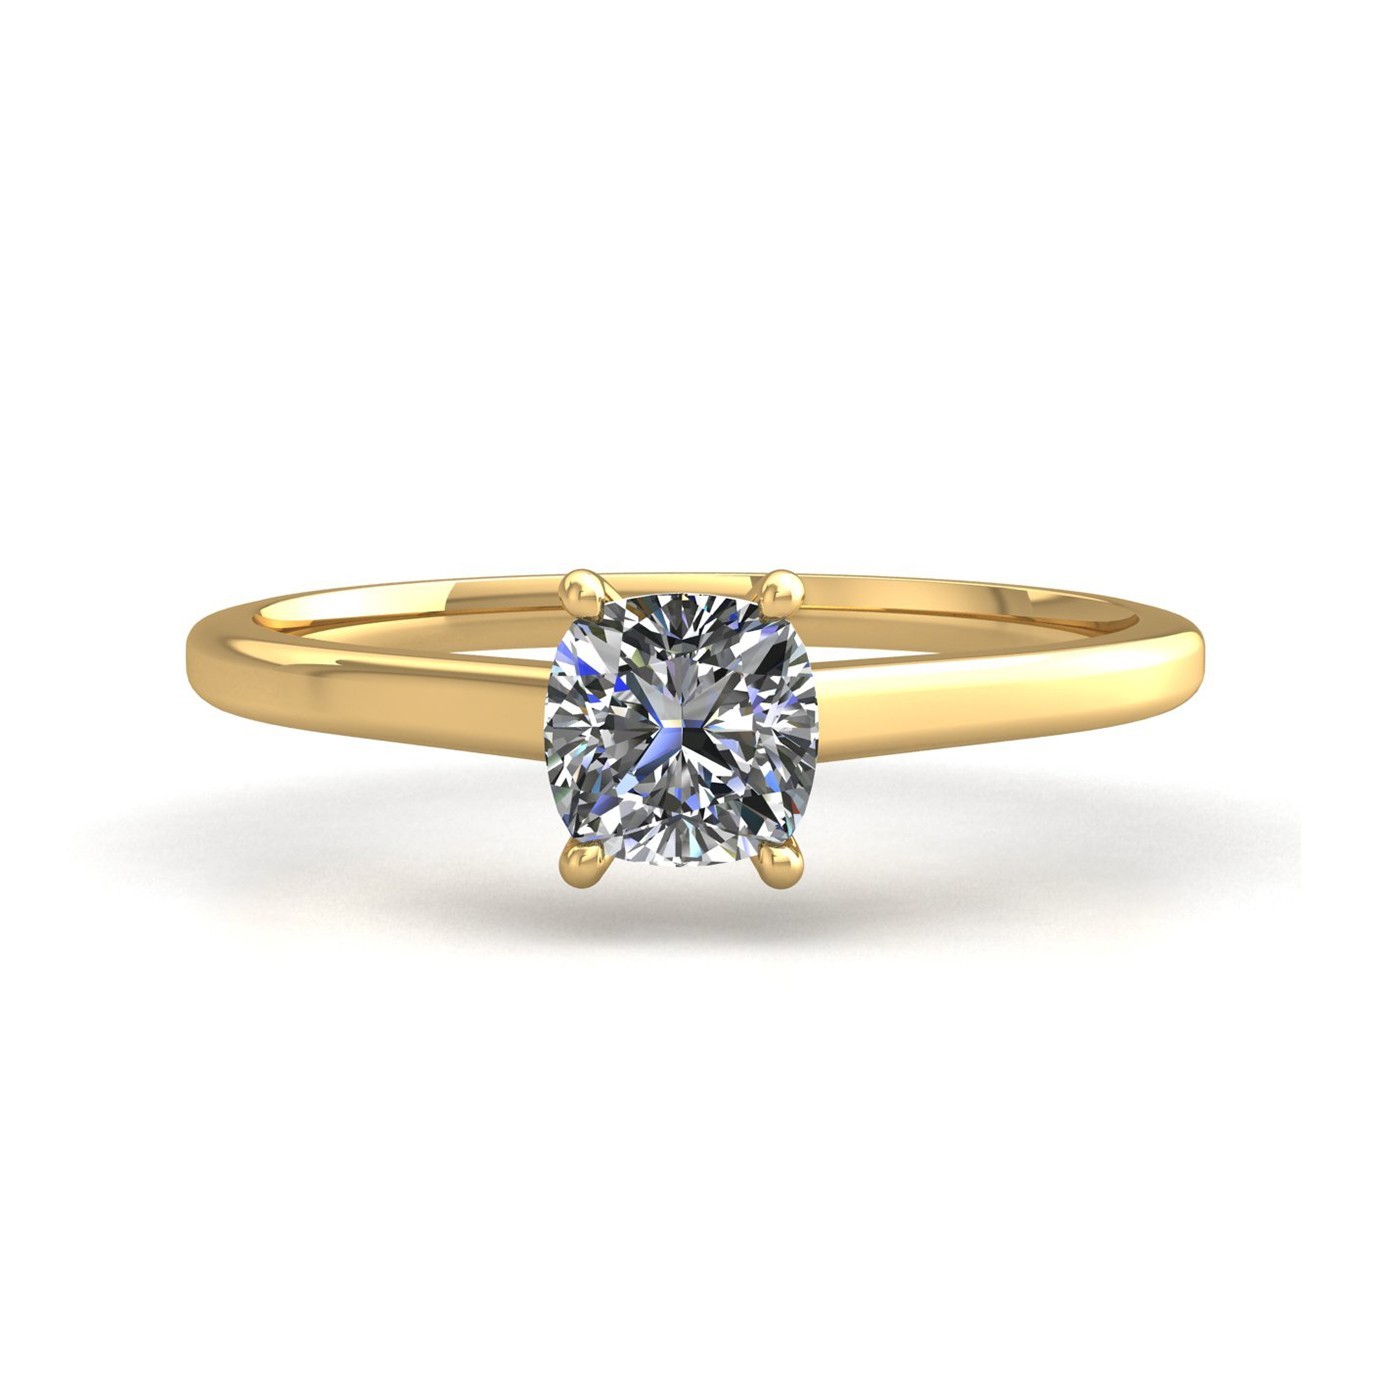 18k yellow gold 2.5ct 4 prongs solitaire cushion cut diamond engagement ring with whisper thin band Photos & images